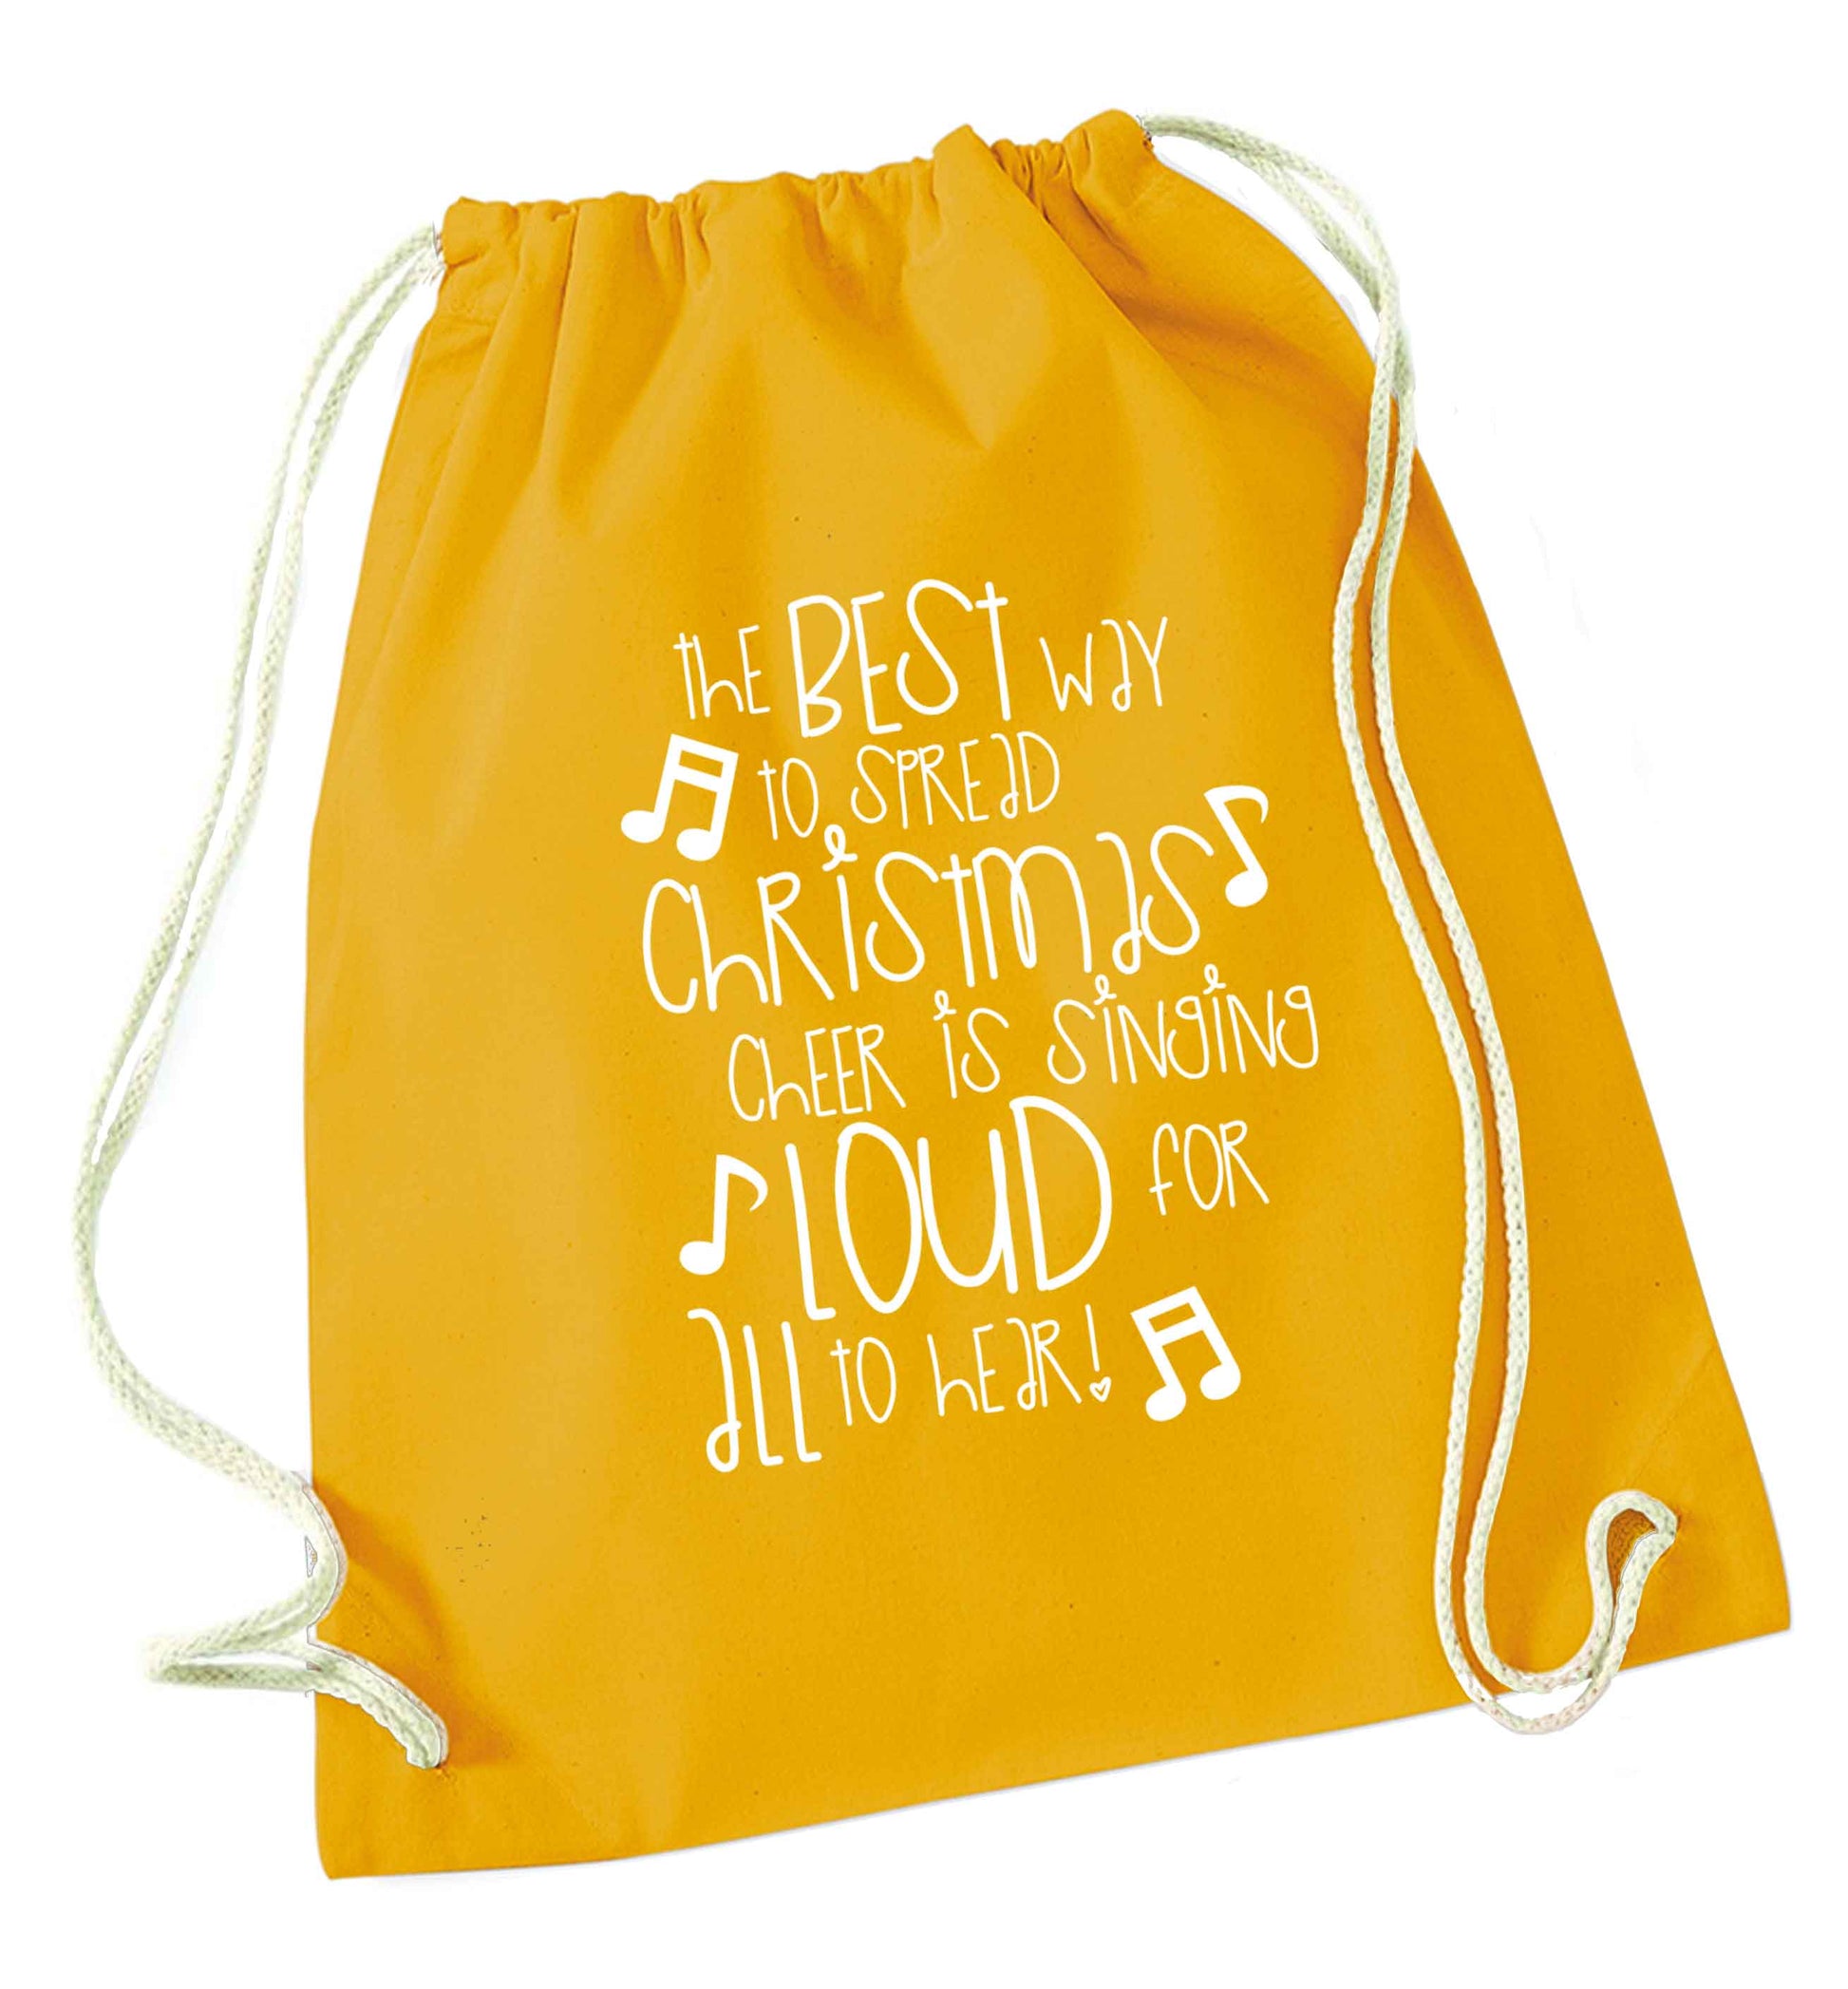 The best way to spread Christmas cheer is singing loud for all to hear mustard drawstring bag